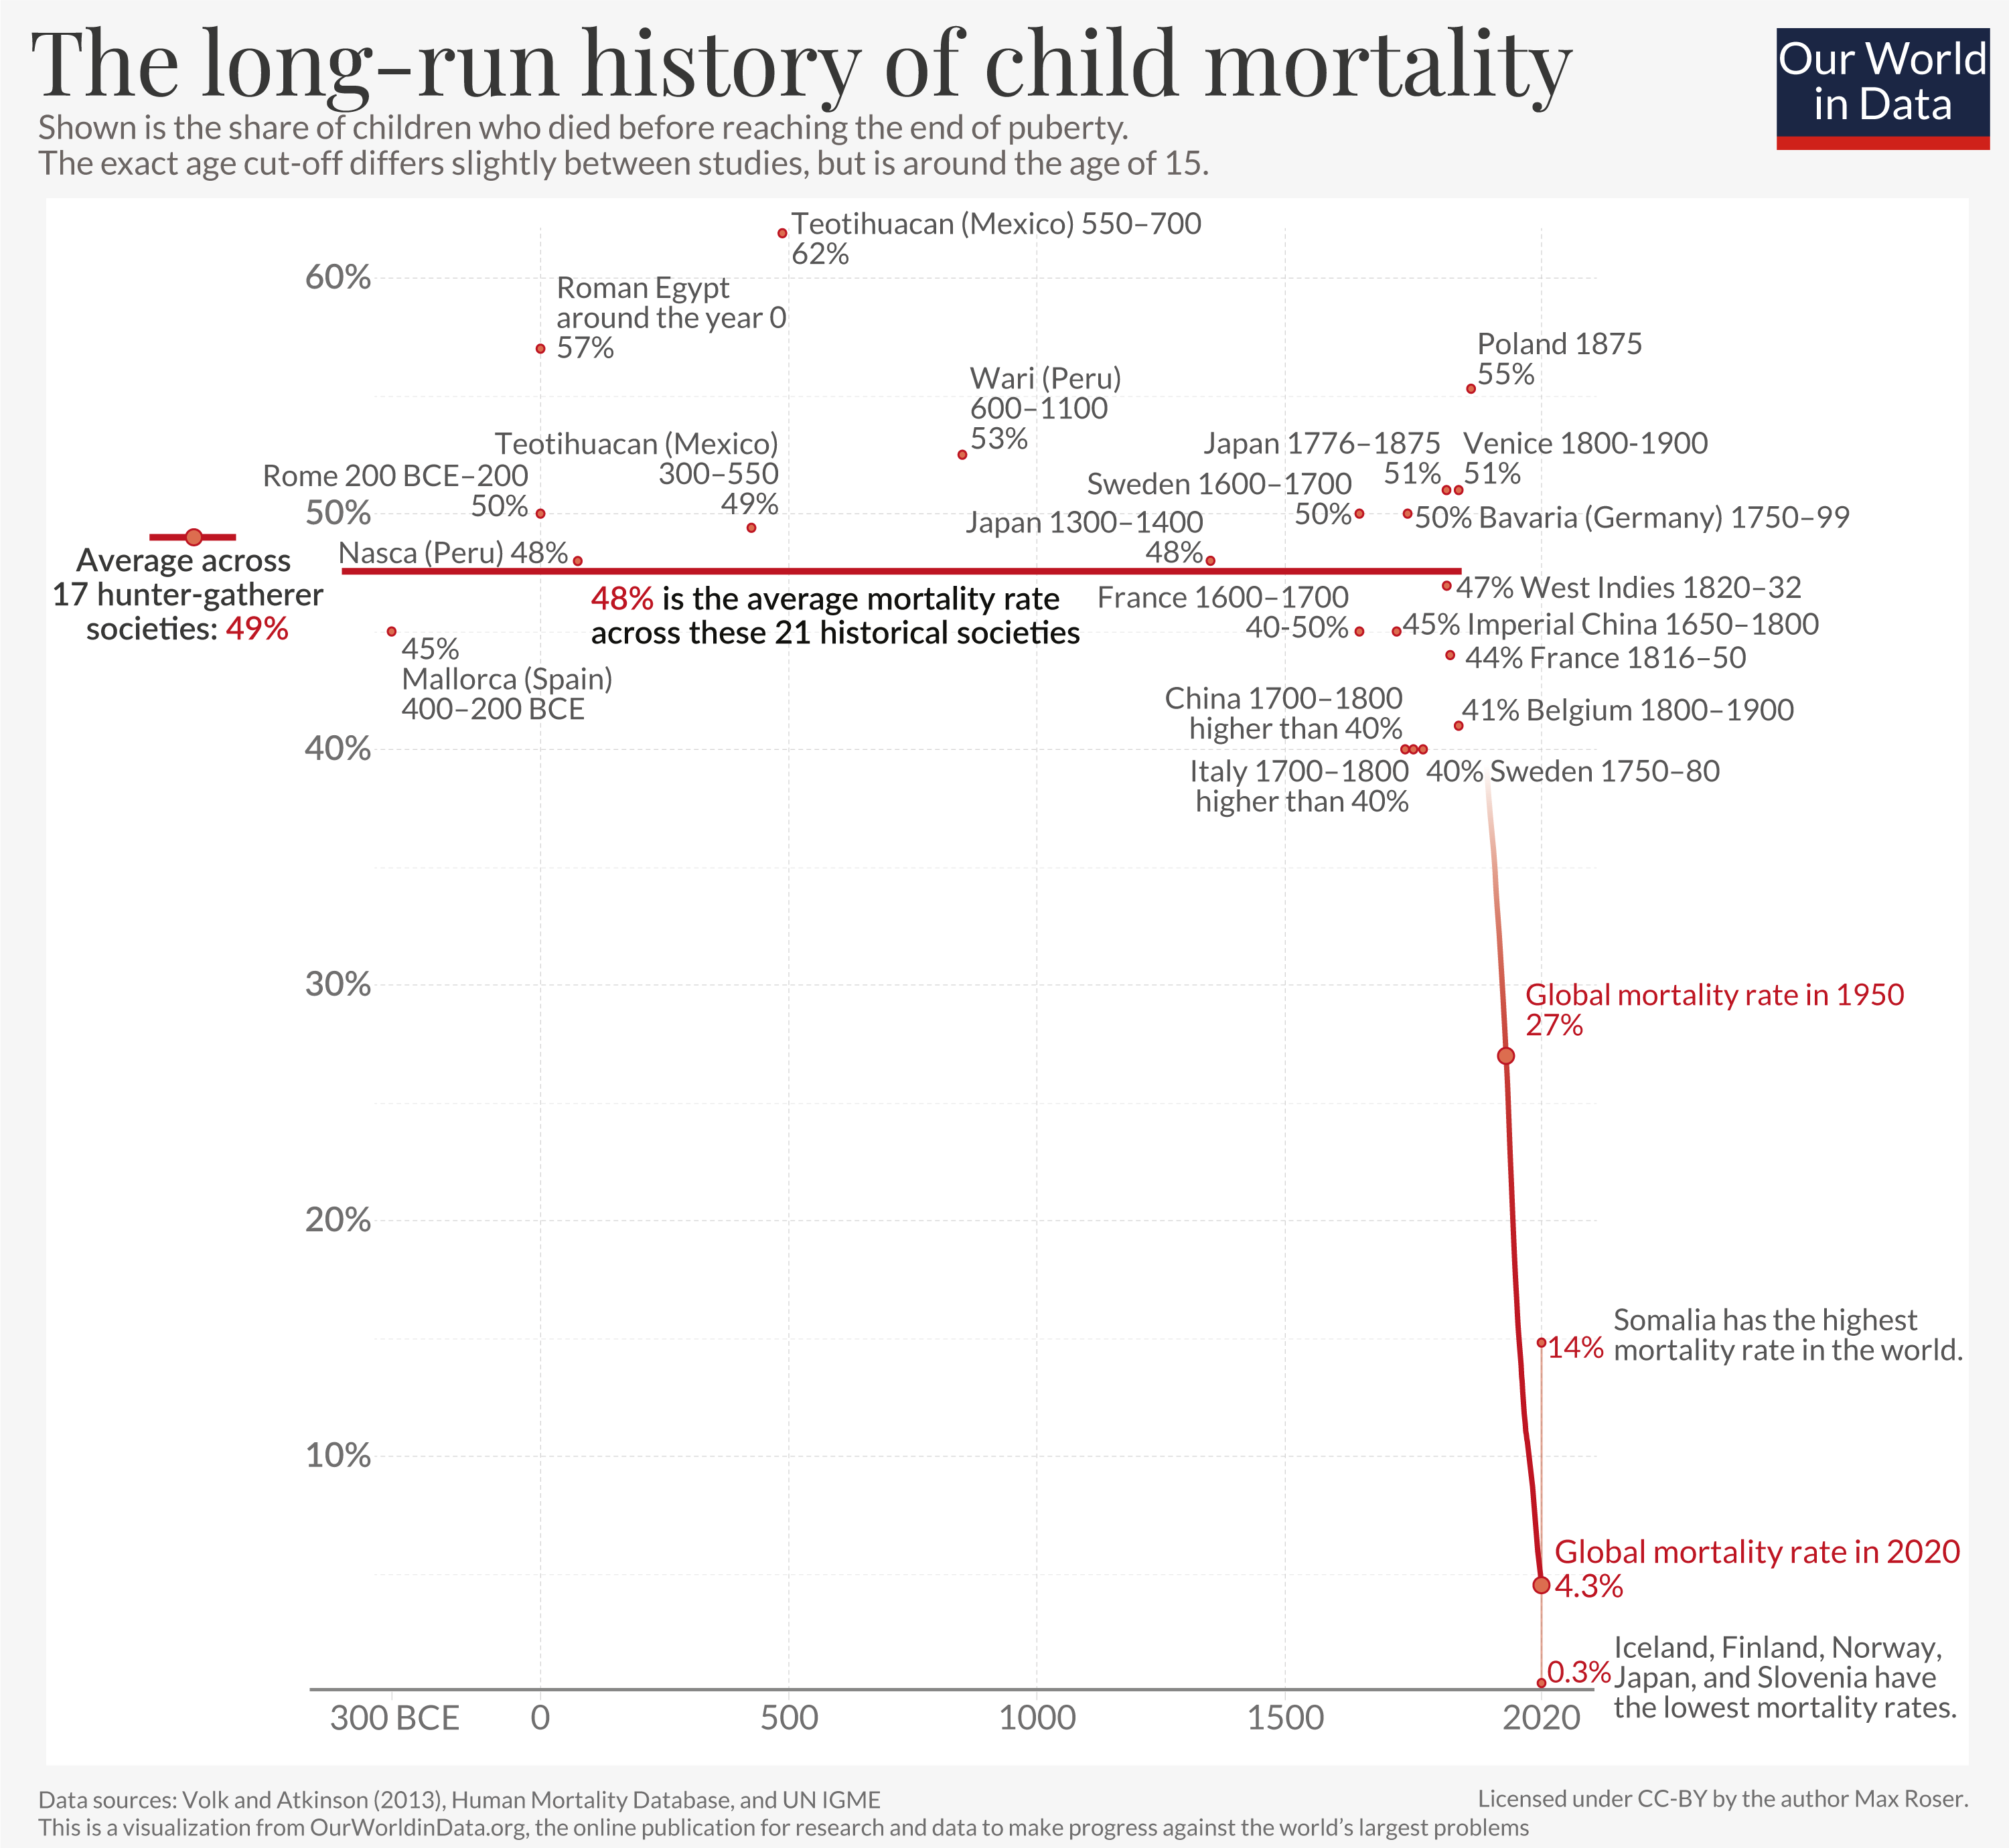 The long run history of child mortality chart showing child mortailty rates in historical civilizations and hunterer gatherer societies, contrasted with child mortality rates since the 19th century.